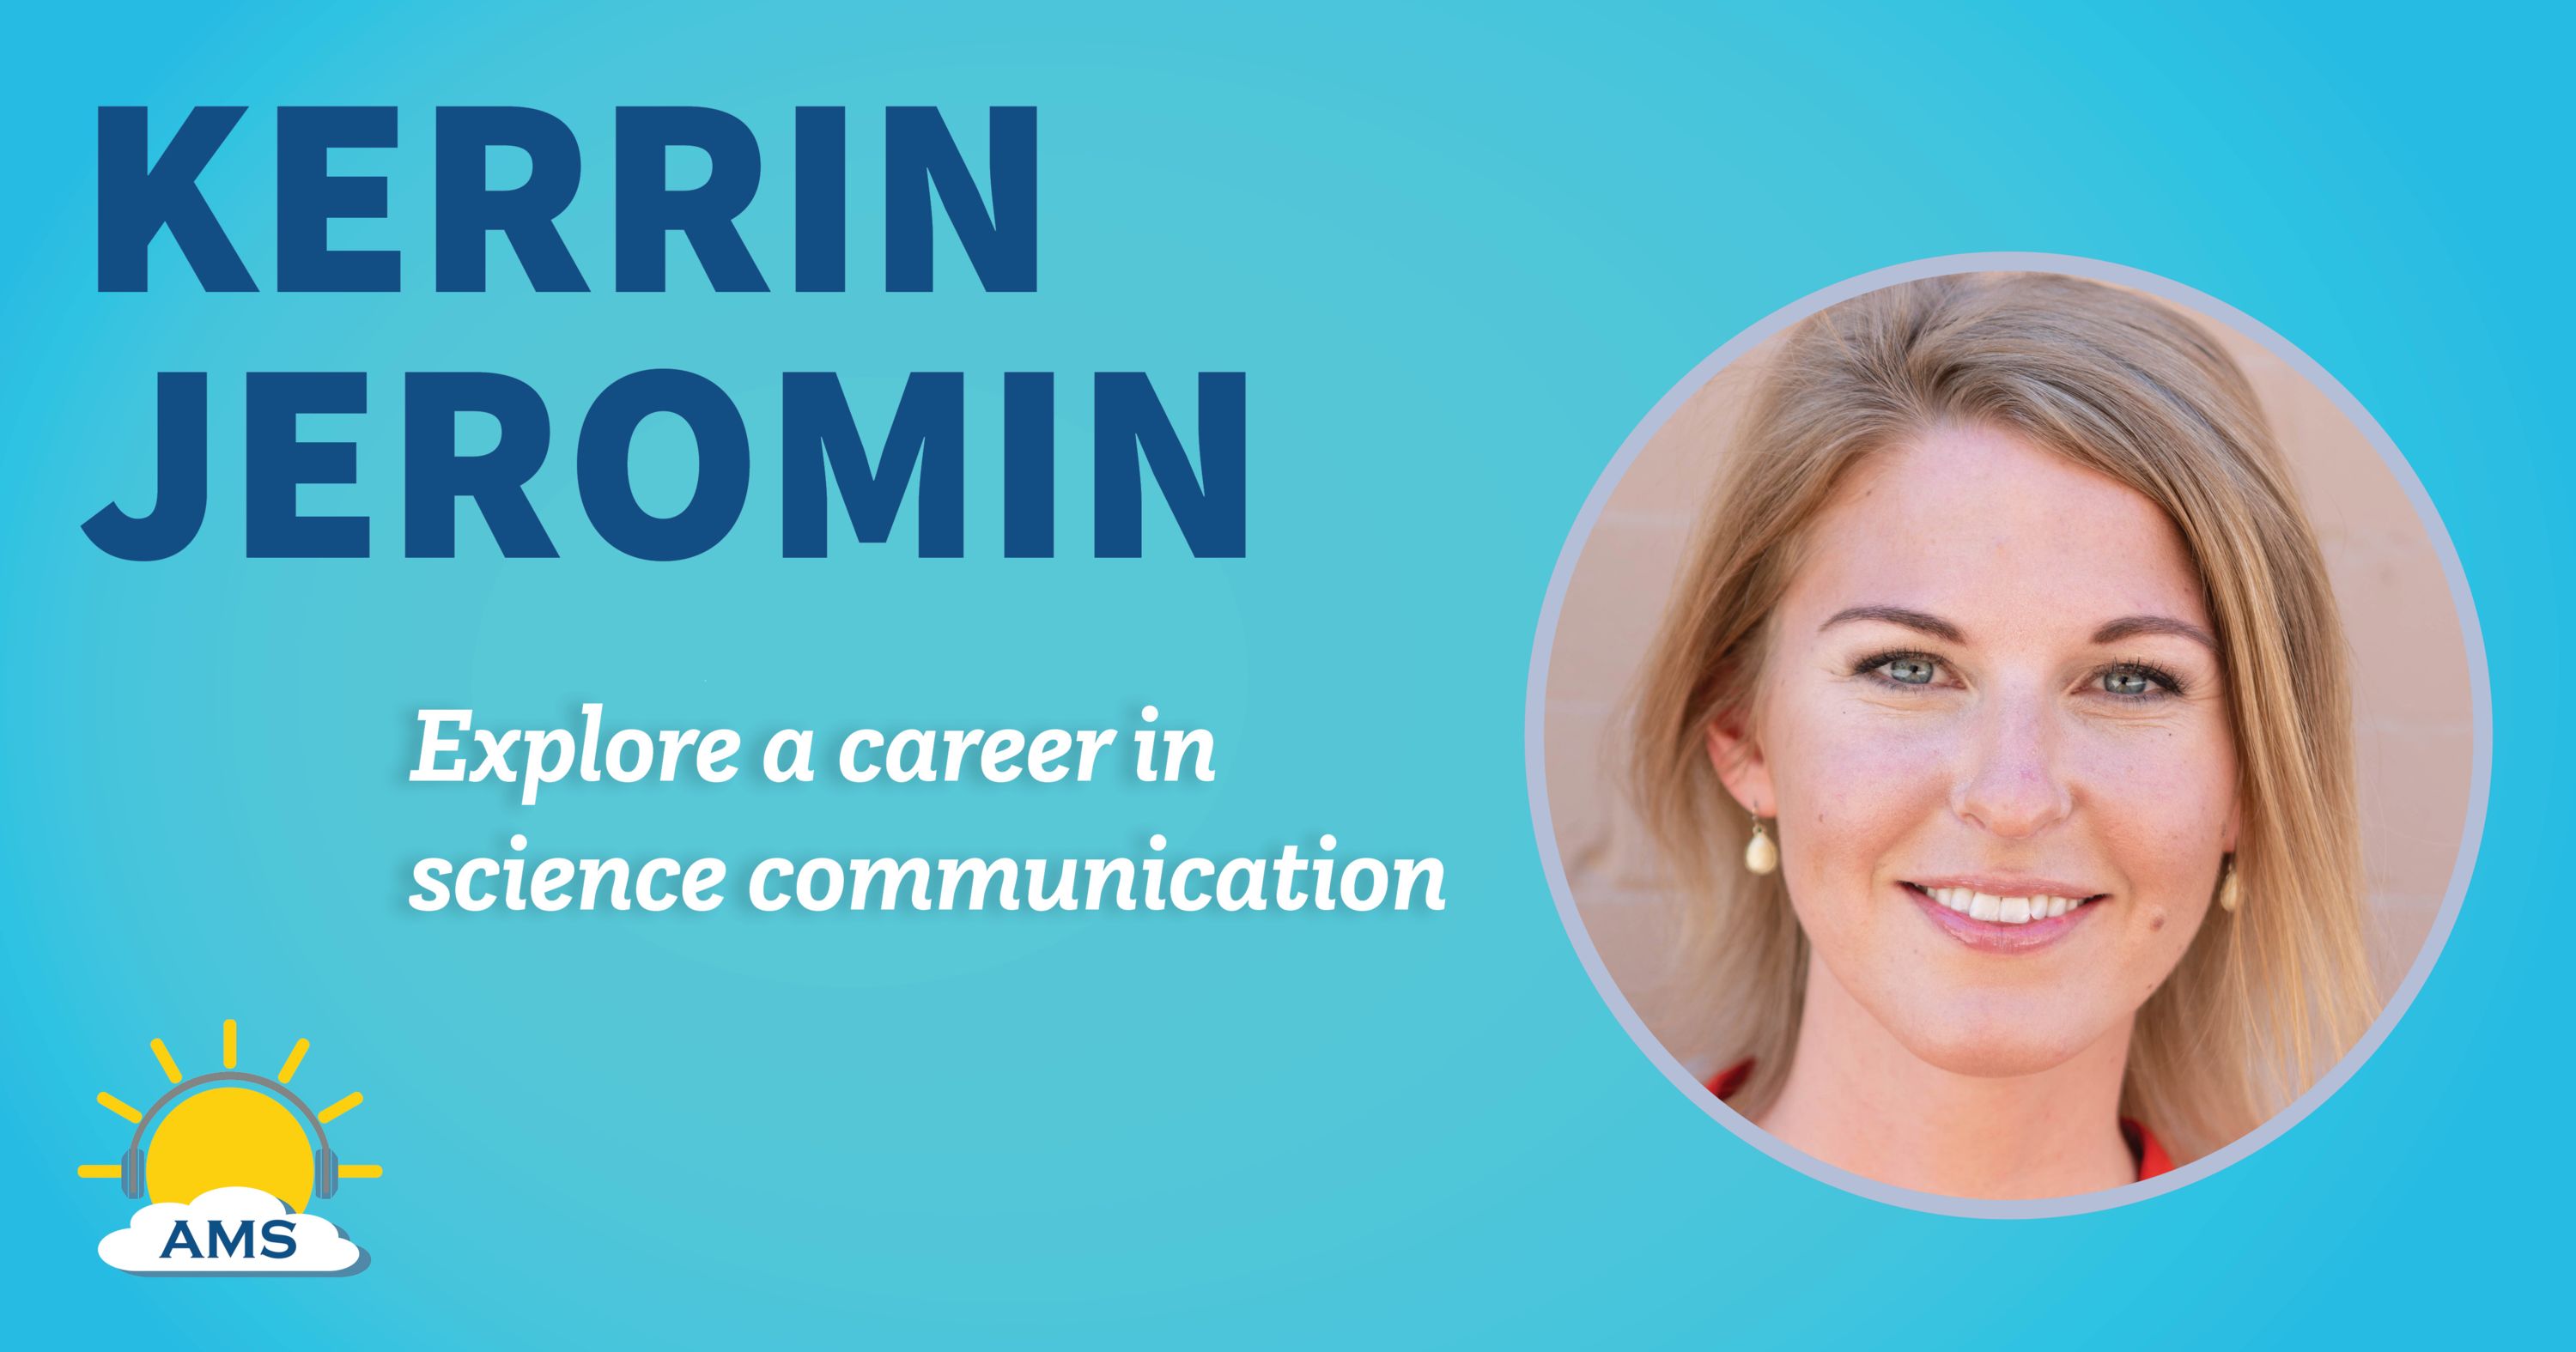 kerrin jeromin headshot graphic with teaser text that reads "explore a career in science communication"